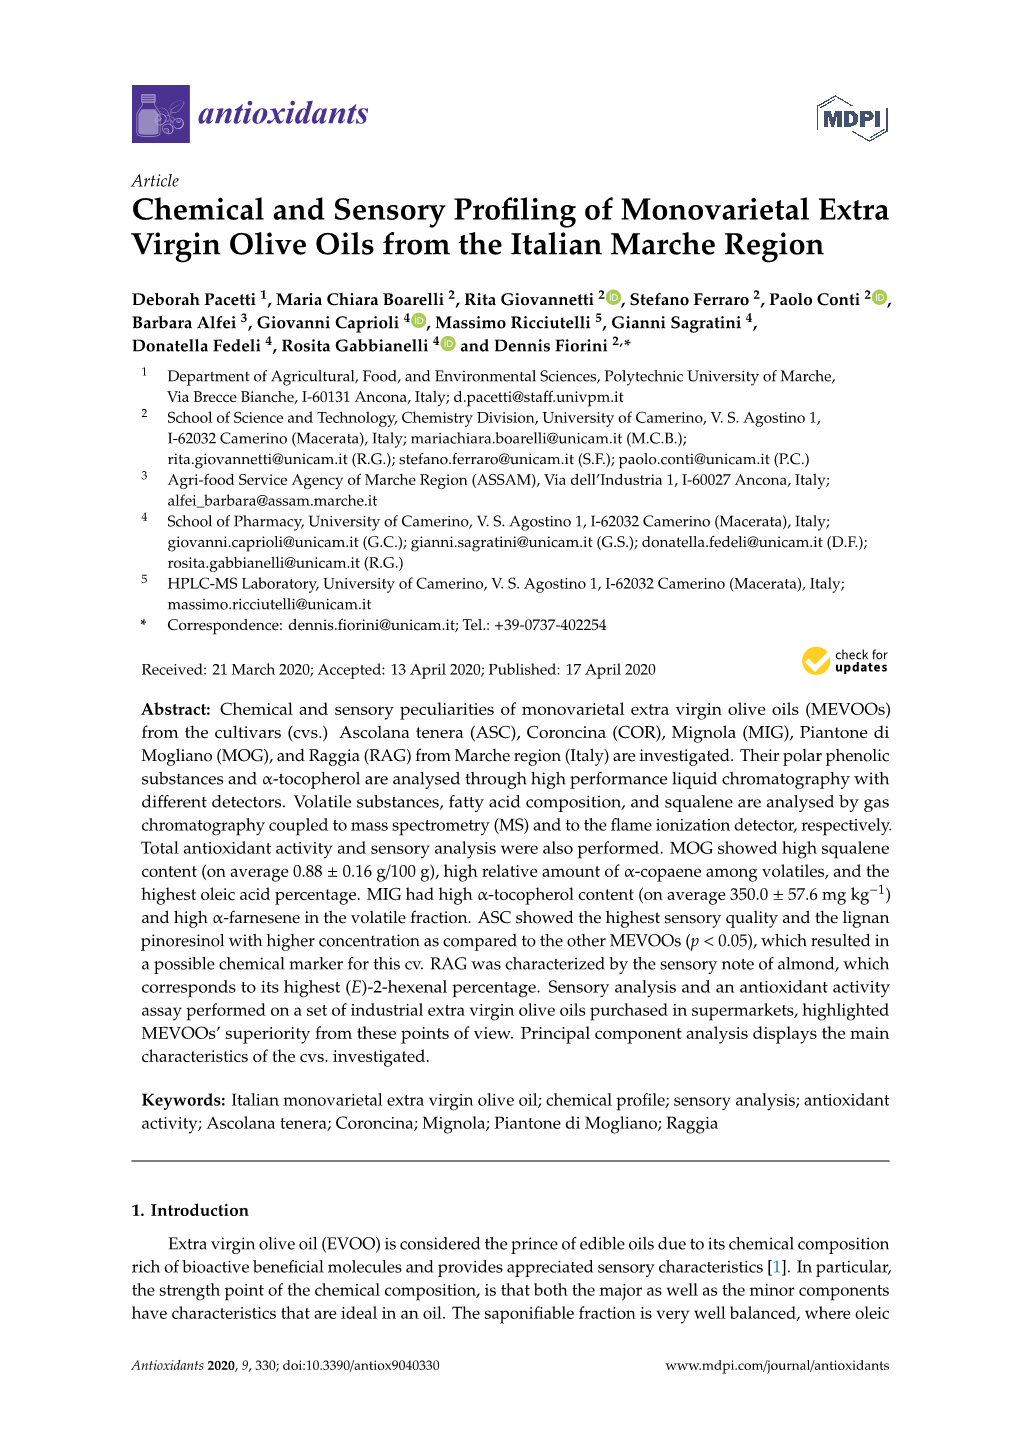 Chemical and Sensory Profiling of Monovarietal Extra Virgin Olive Oils from the Italian Marche Region